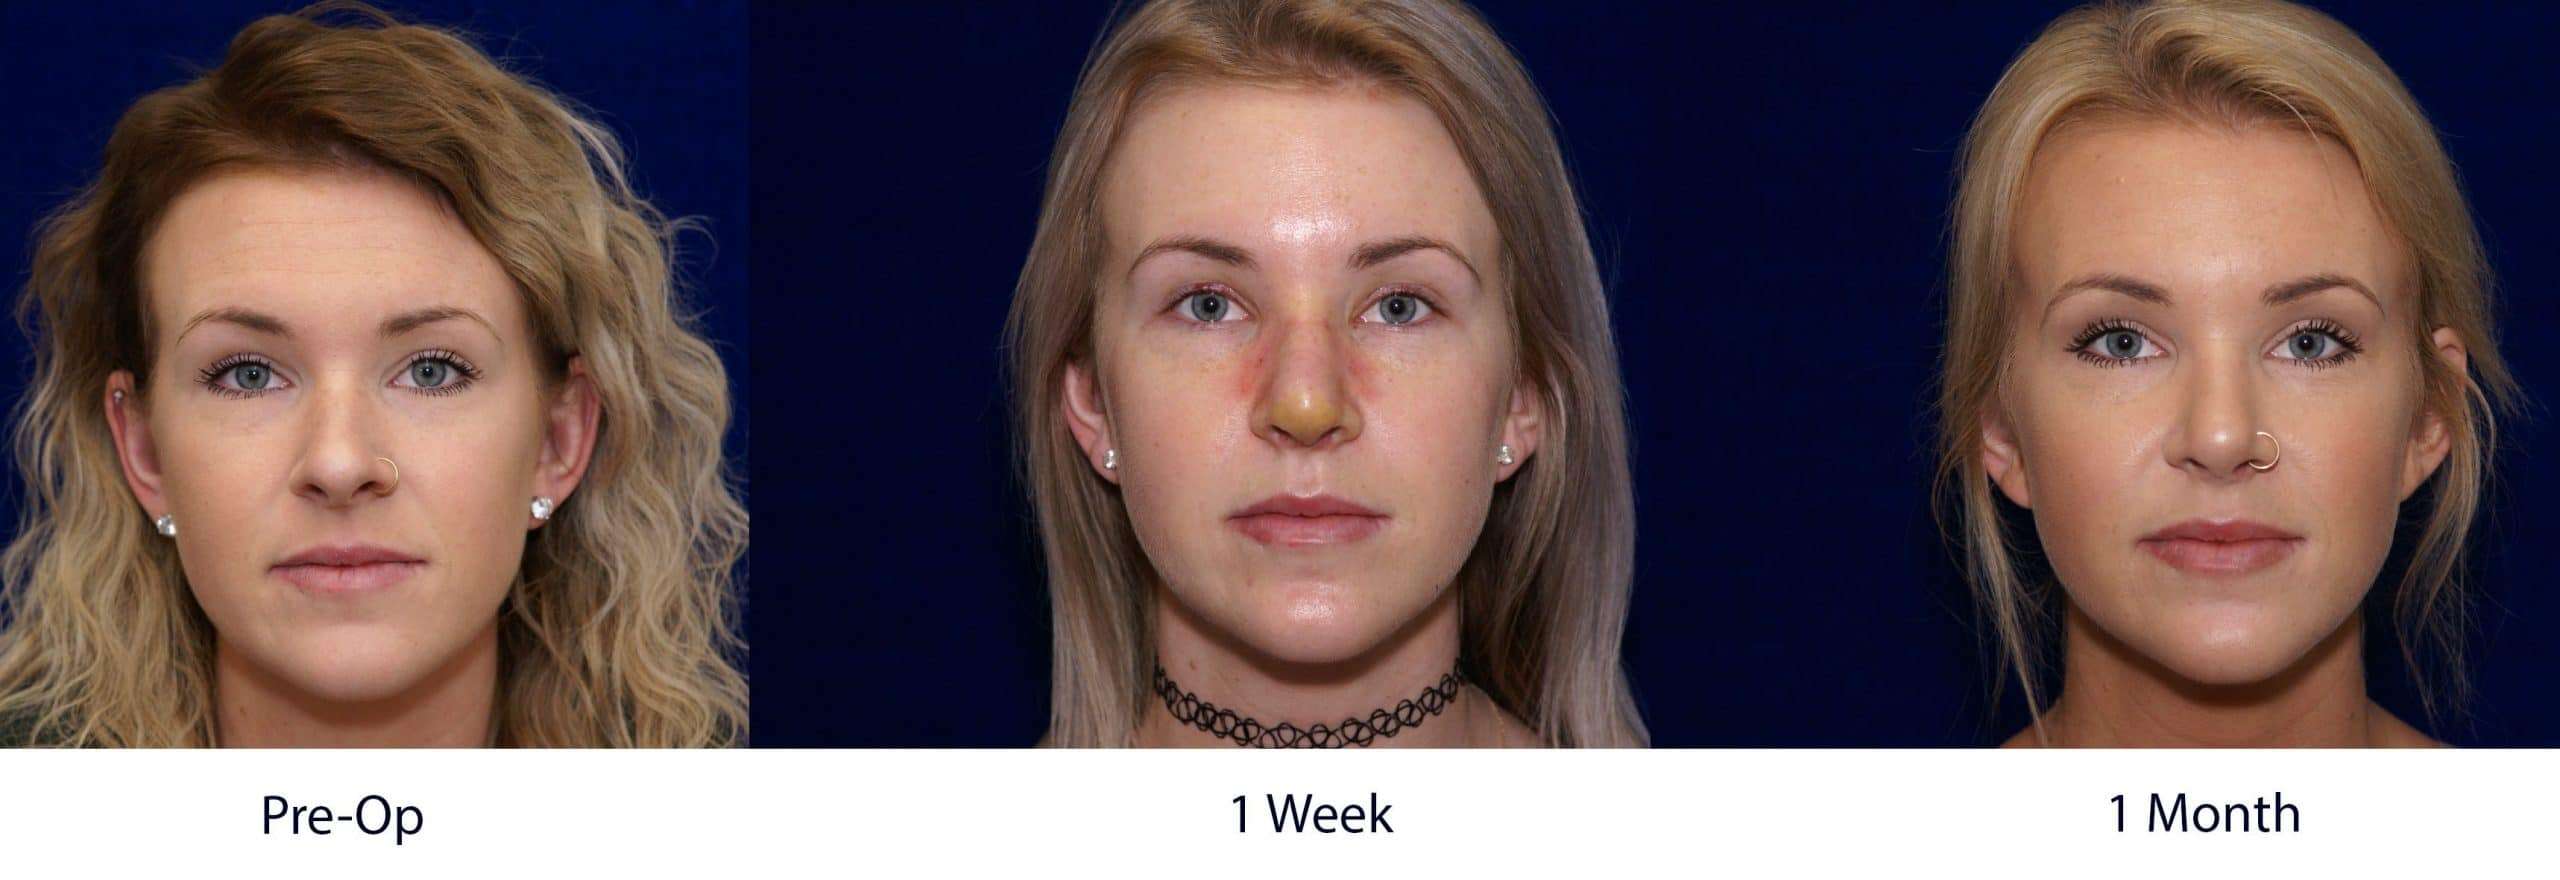 Nose tip swelling after rhinoplasty ...